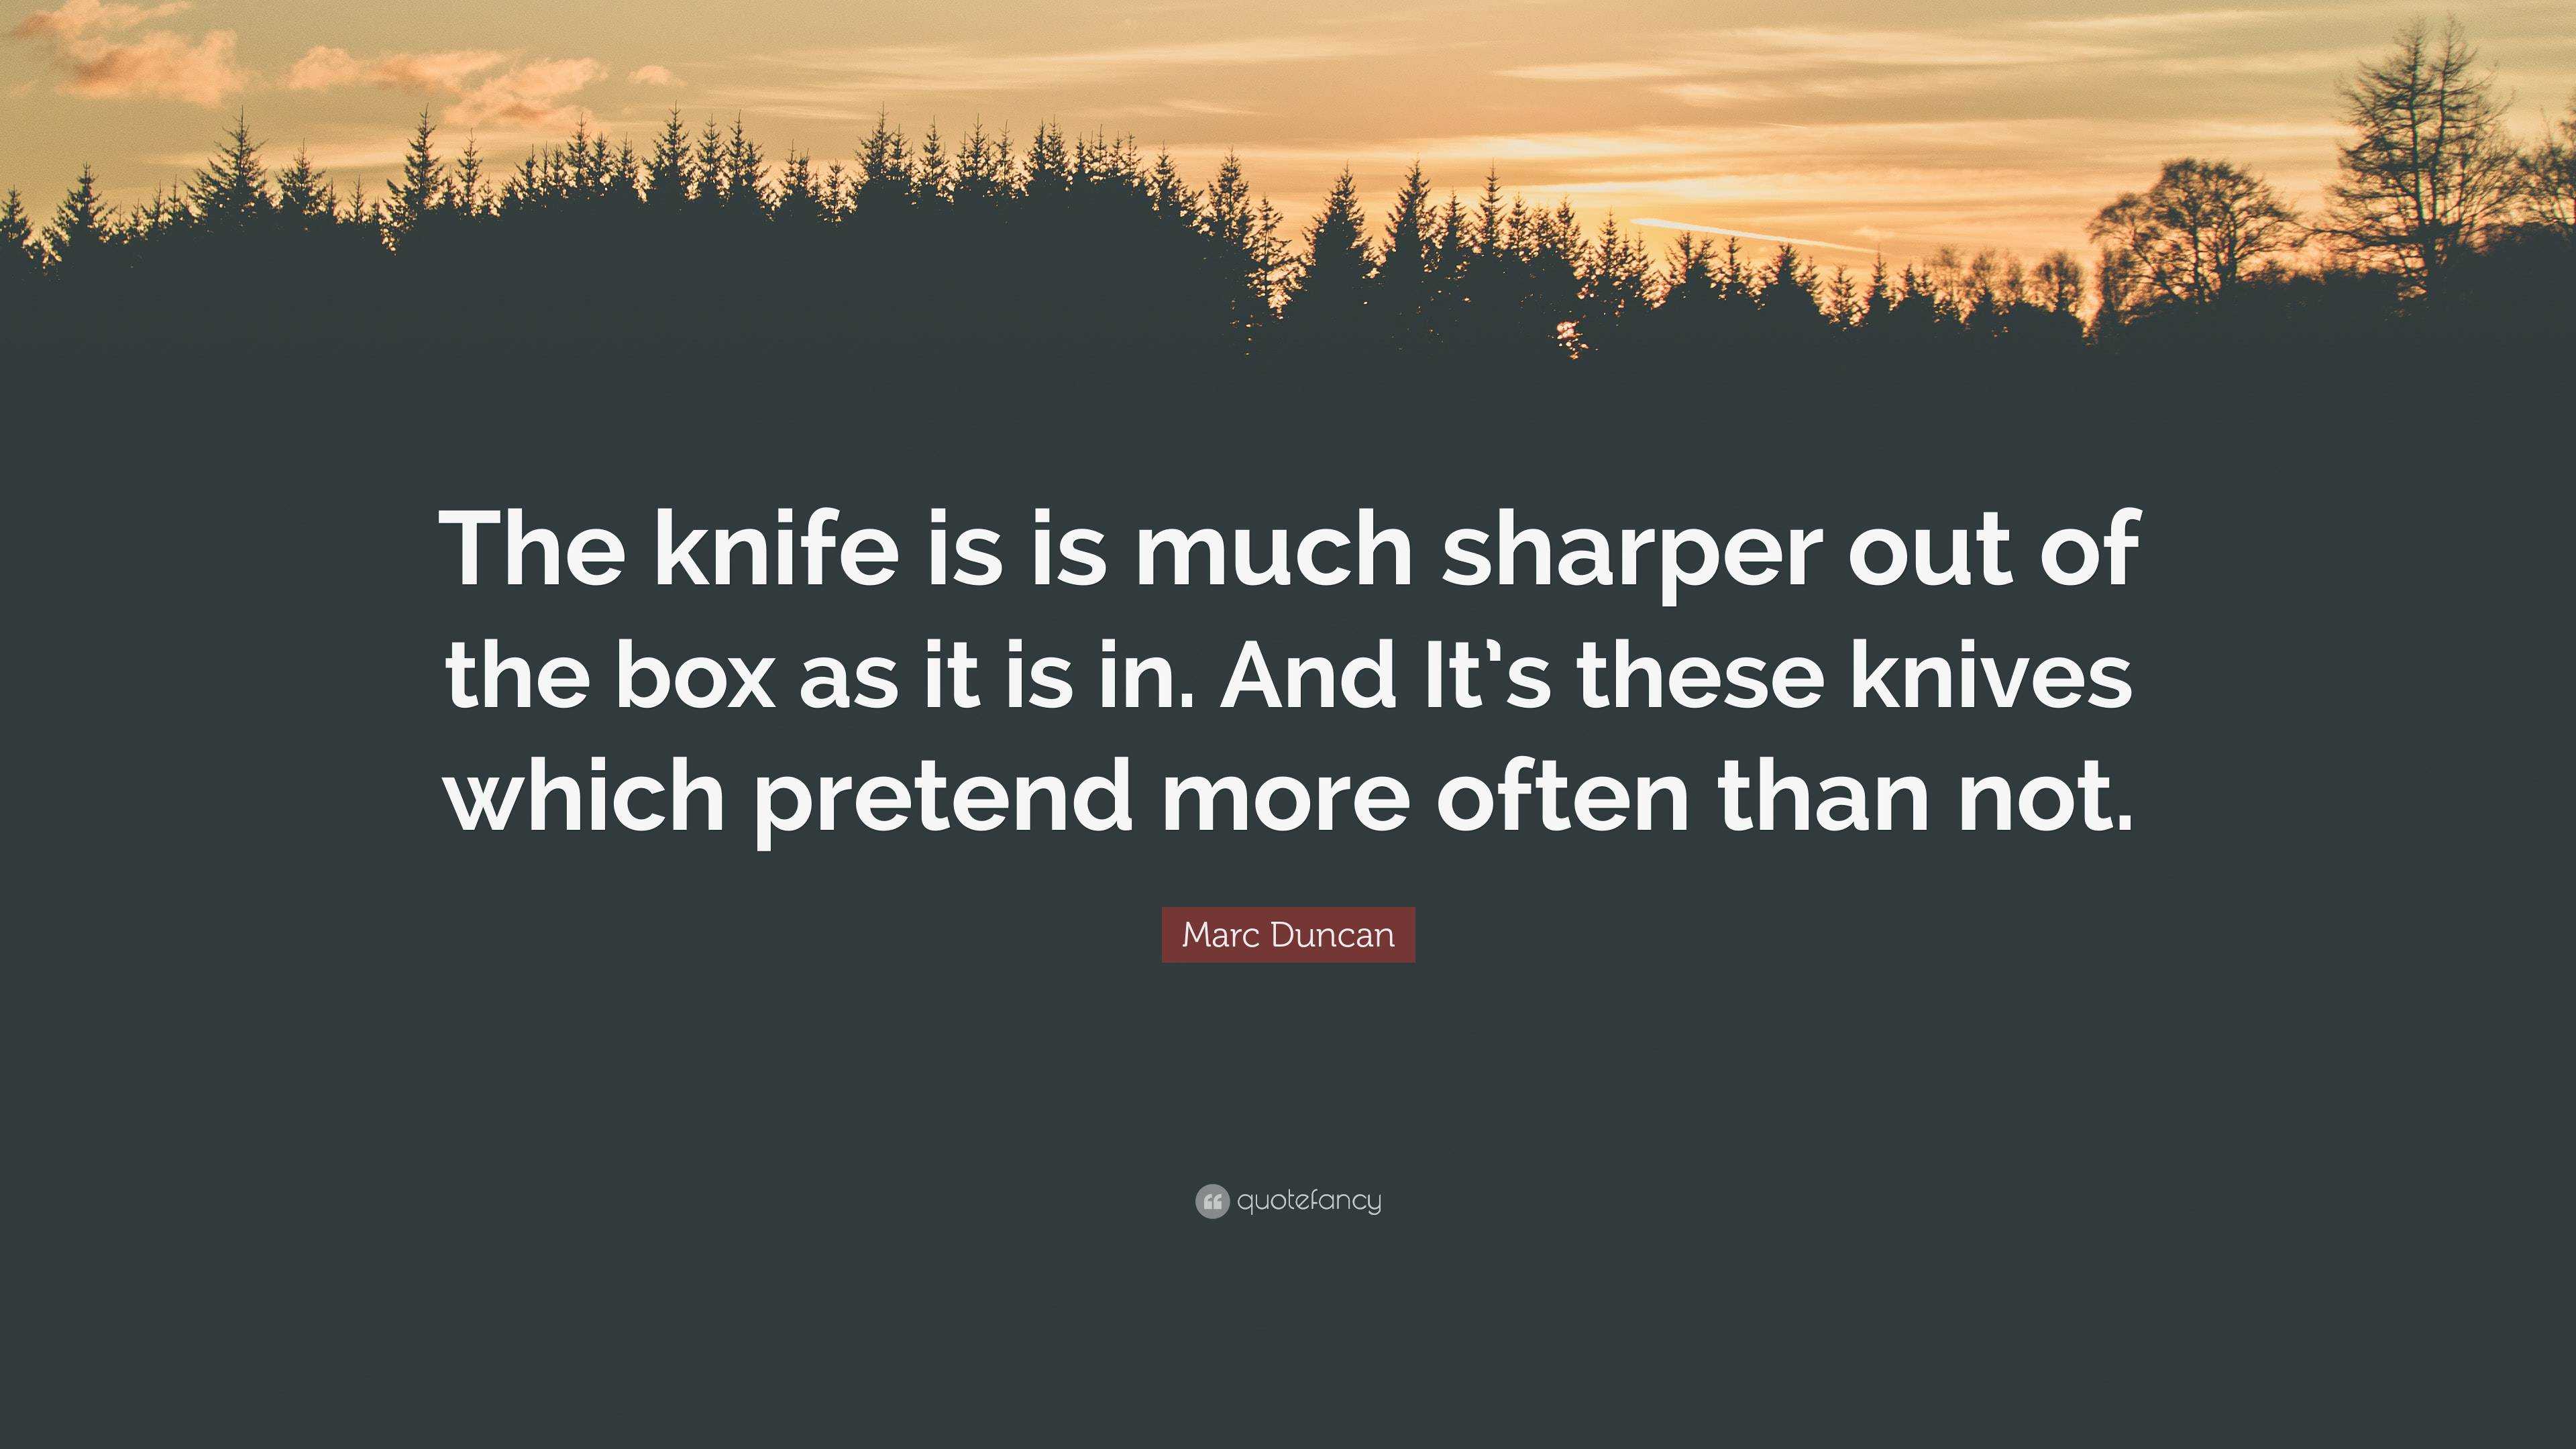 Marc Duncan Quote: “The knife is is much sharper out of the box as it ...